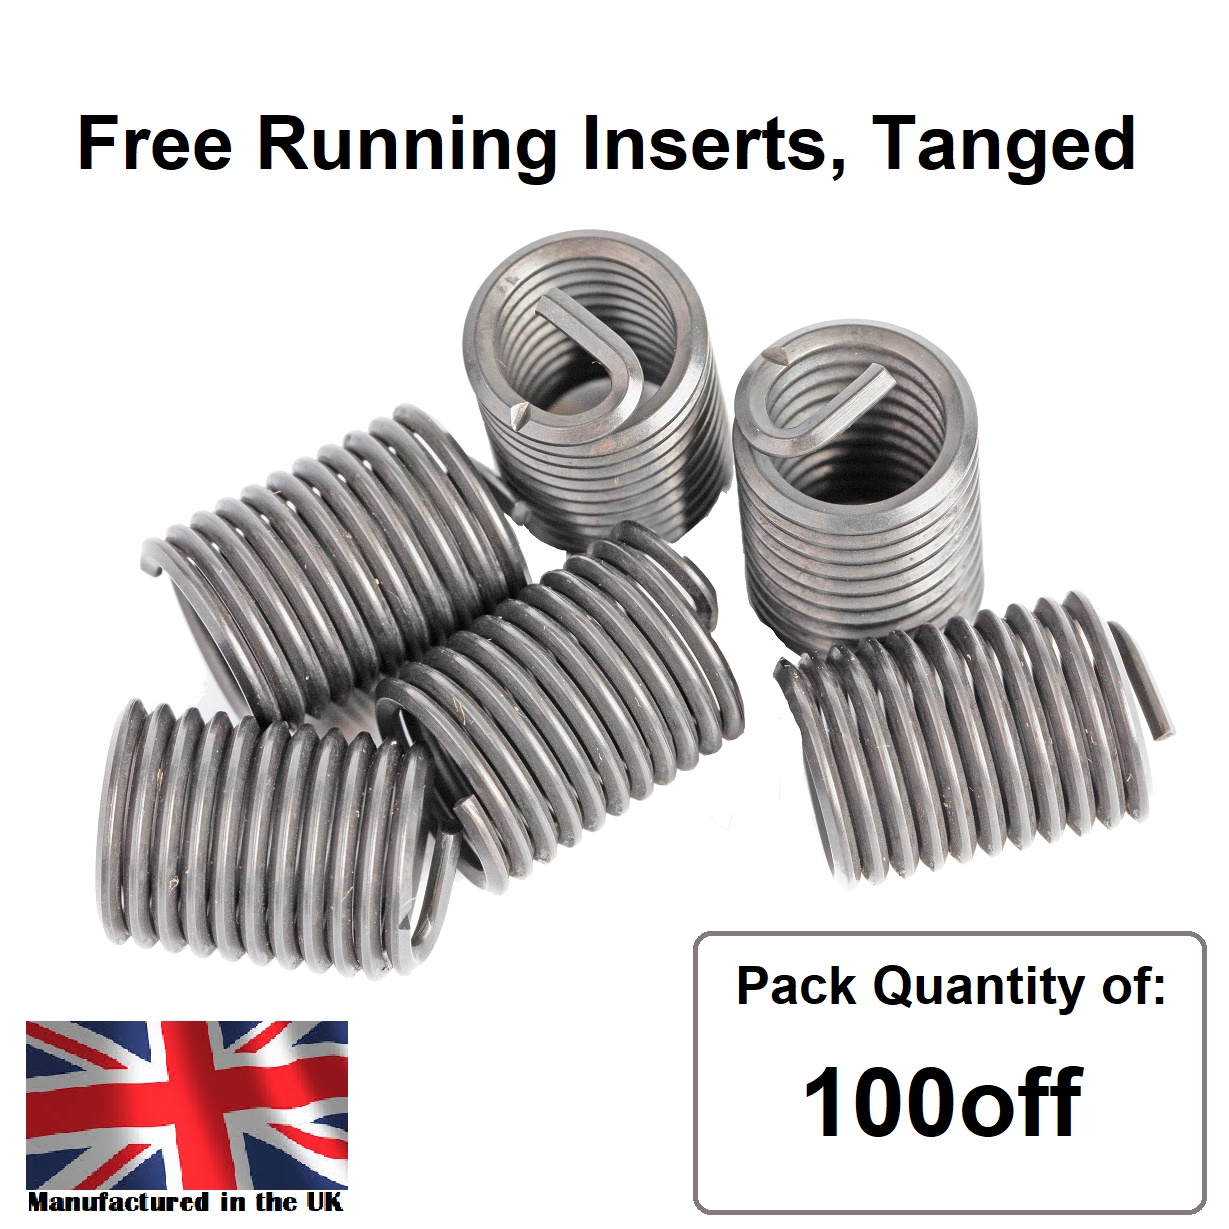 8-32 x 1.5D UNC, Free Running, Tanged, Wire Thread Repair Insert, 304/A2 Stainless (Pack 100)